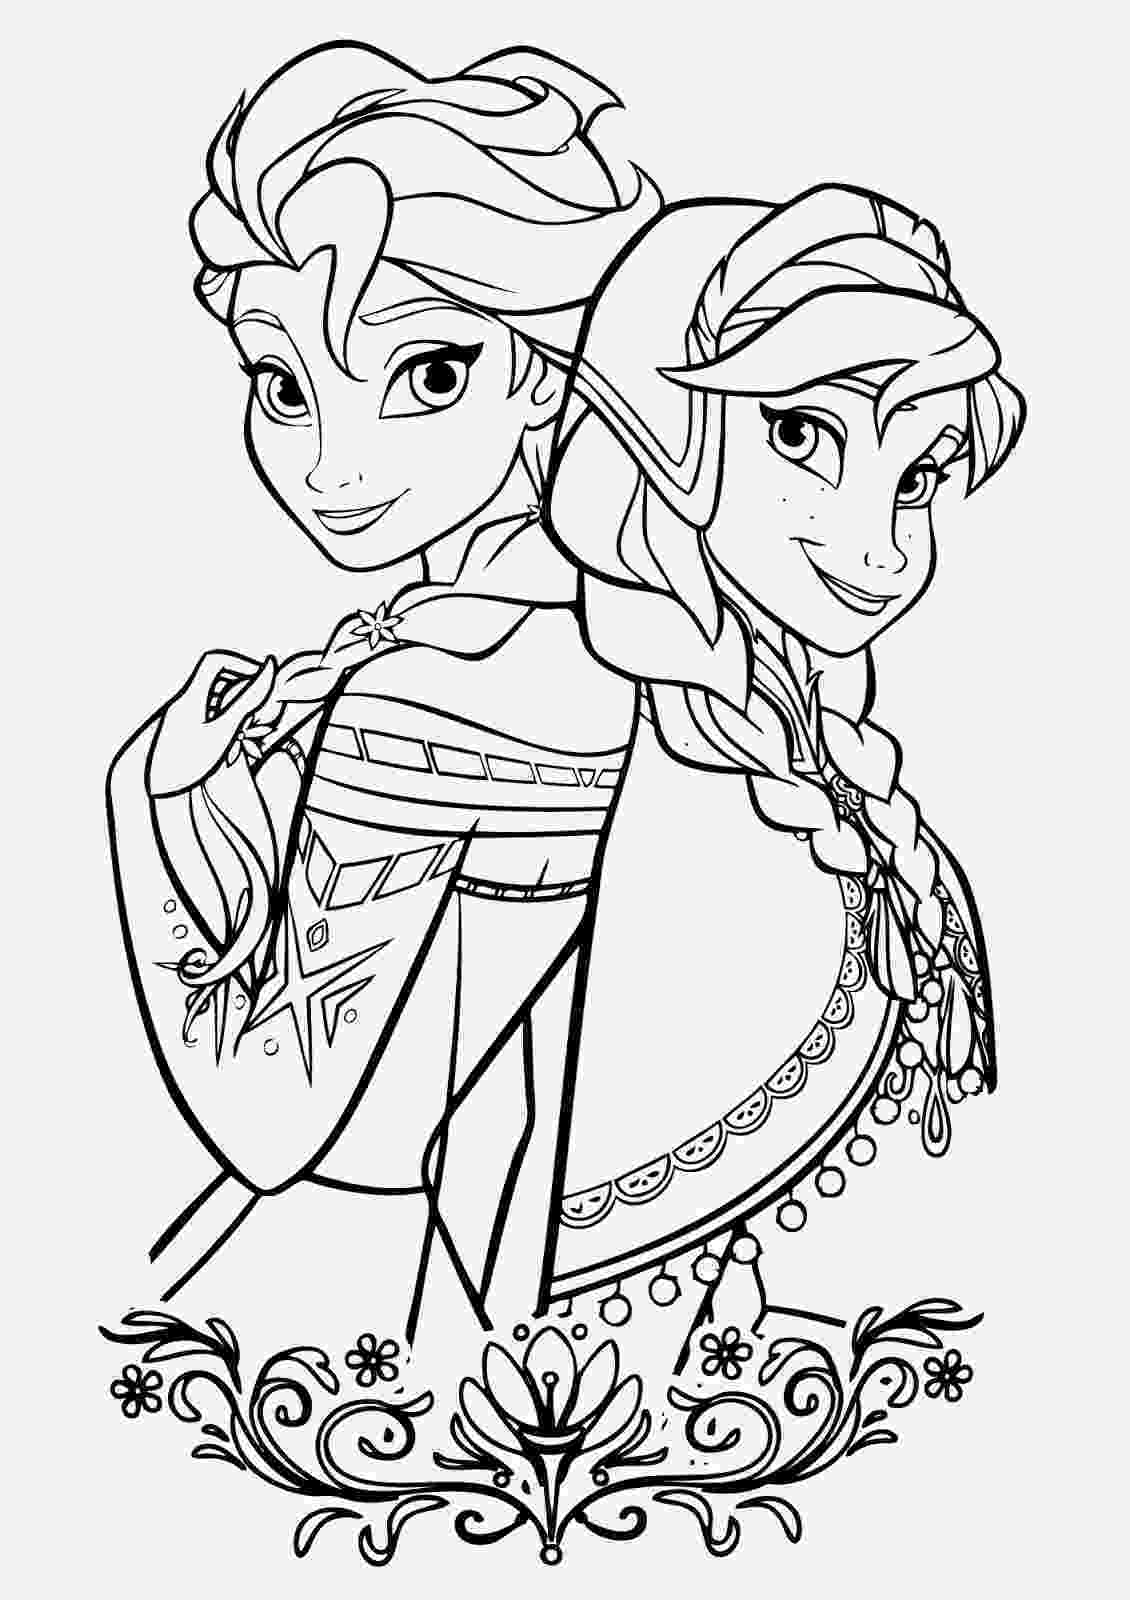 free disney coloring pages 15 beautiful disney frozen coloring pages free instant free pages disney coloring 